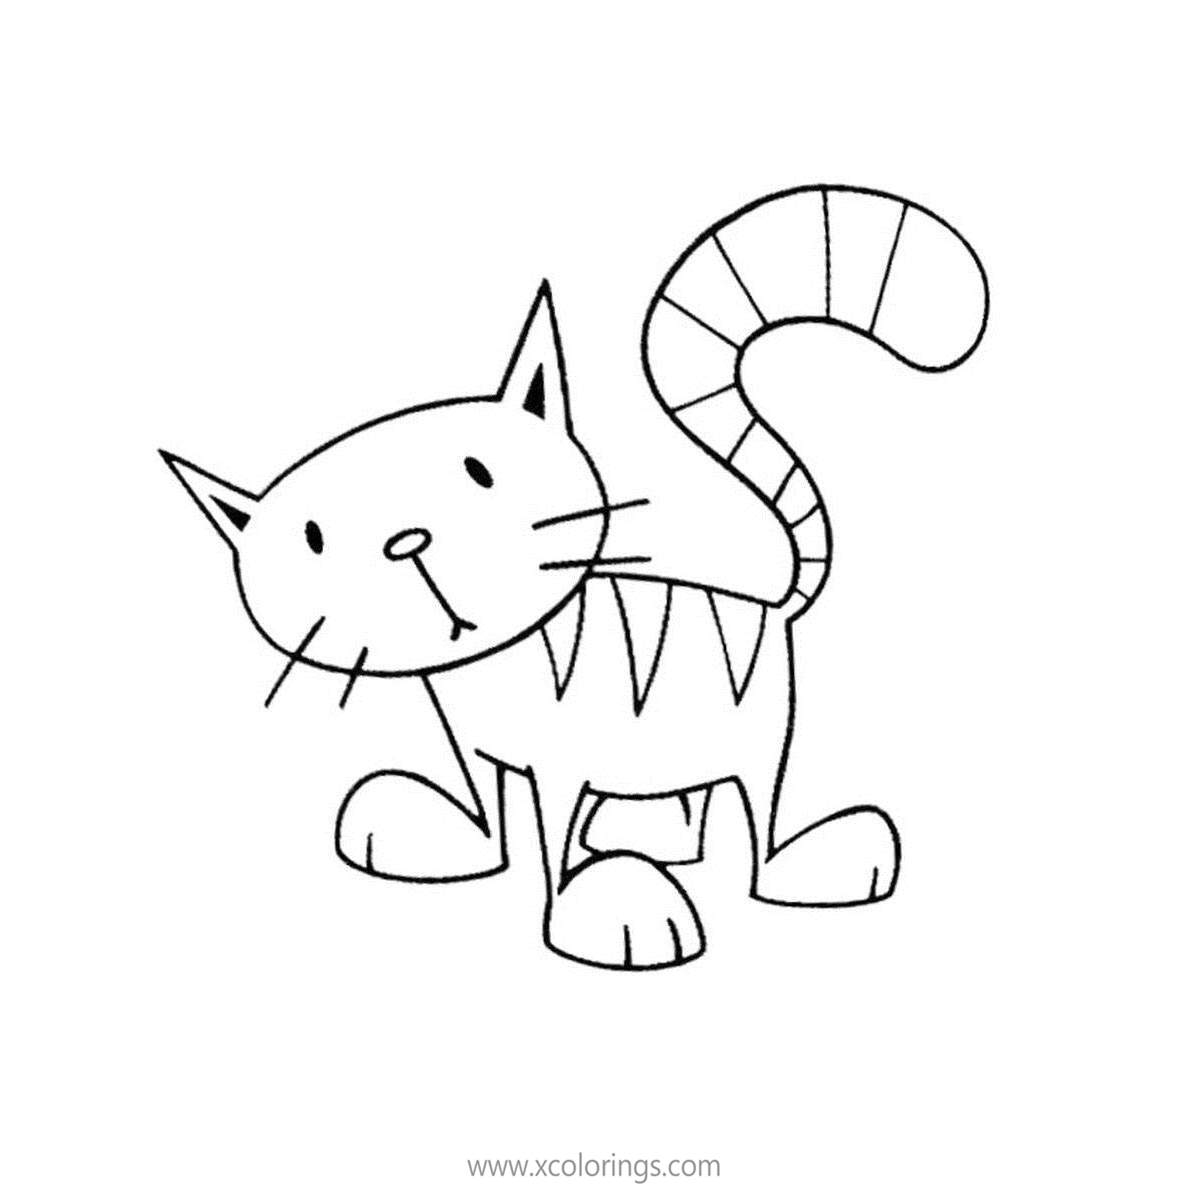 Free Bob the Builder Coloring Pages Cute Cat Pilchard printable